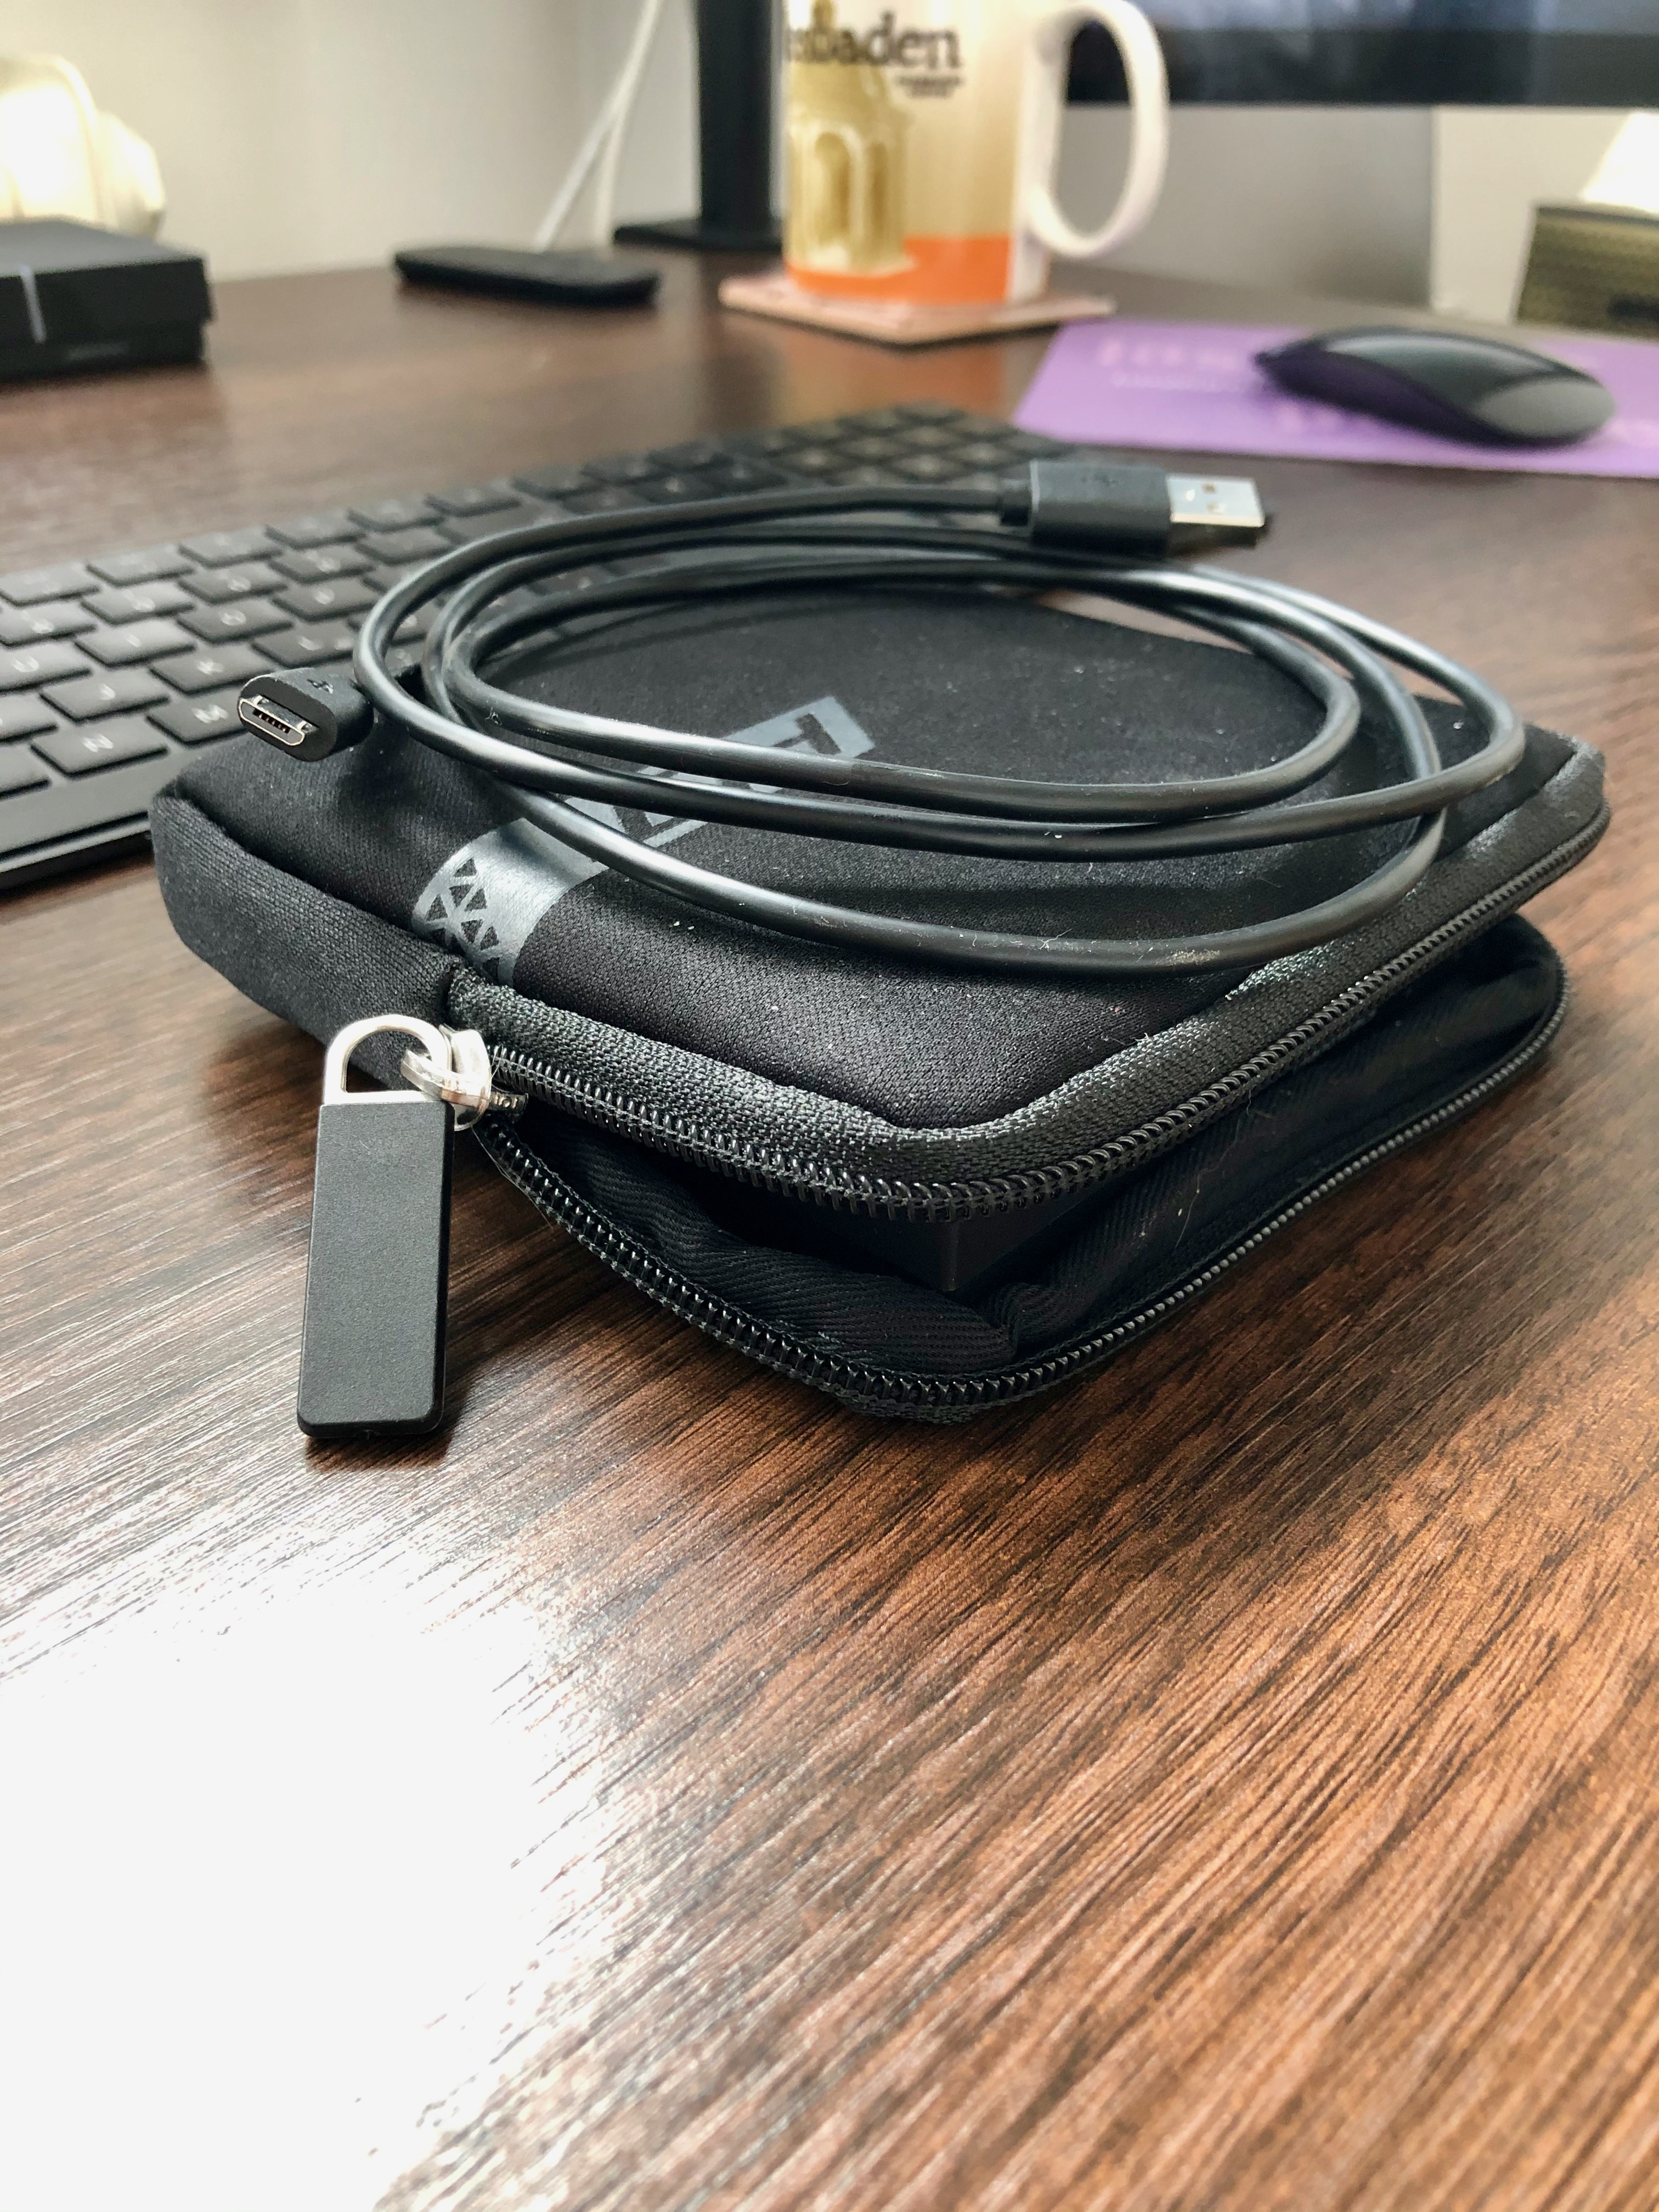 The Poly Calisto 7200 is portable